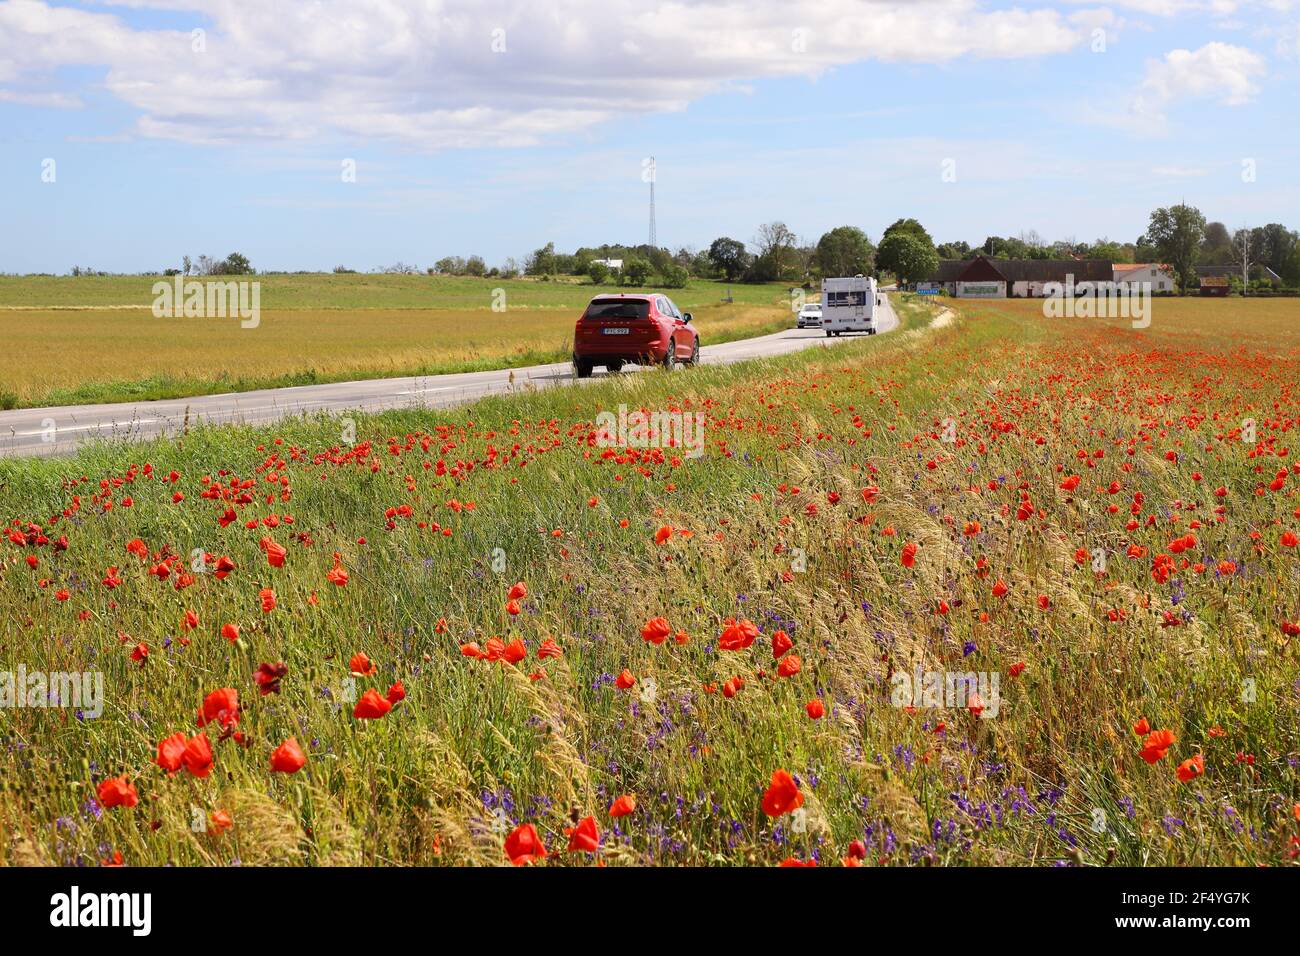 Oland, Sweden - July 7, 2020: traffic on a country roud with blooming poppies in the foreground Stock Photo